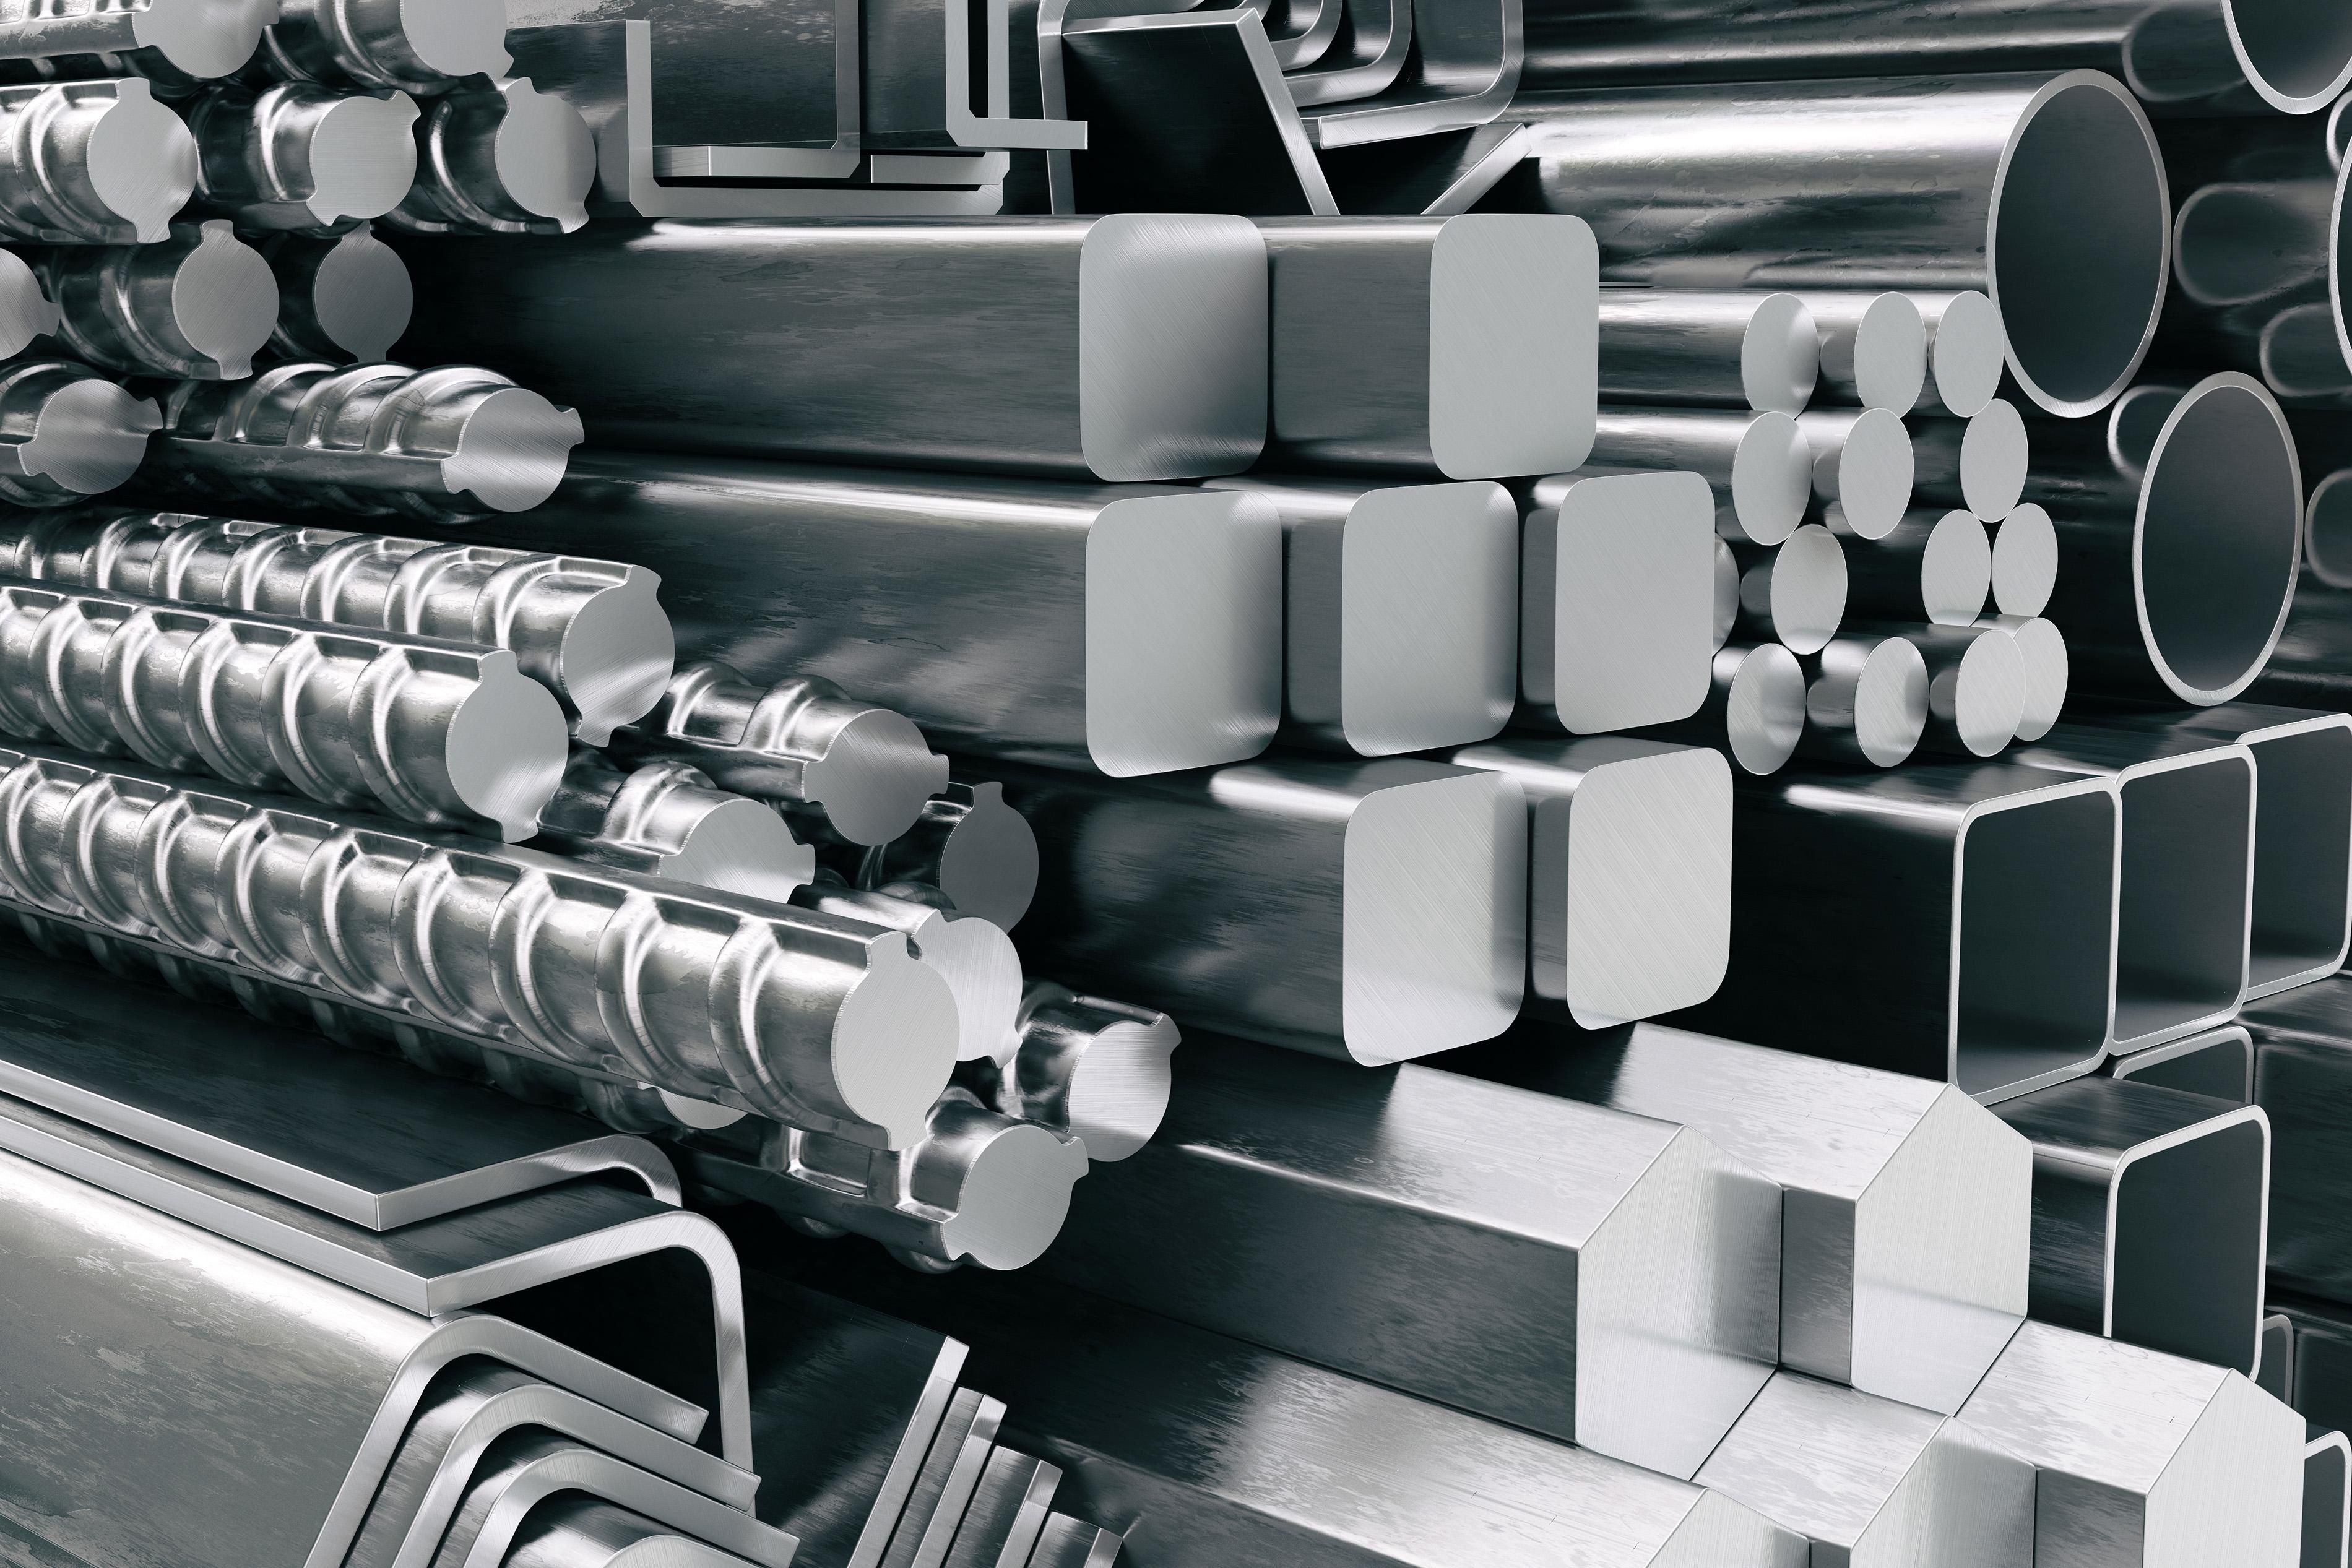 Metal profiles and tubes, different stainless steel products.